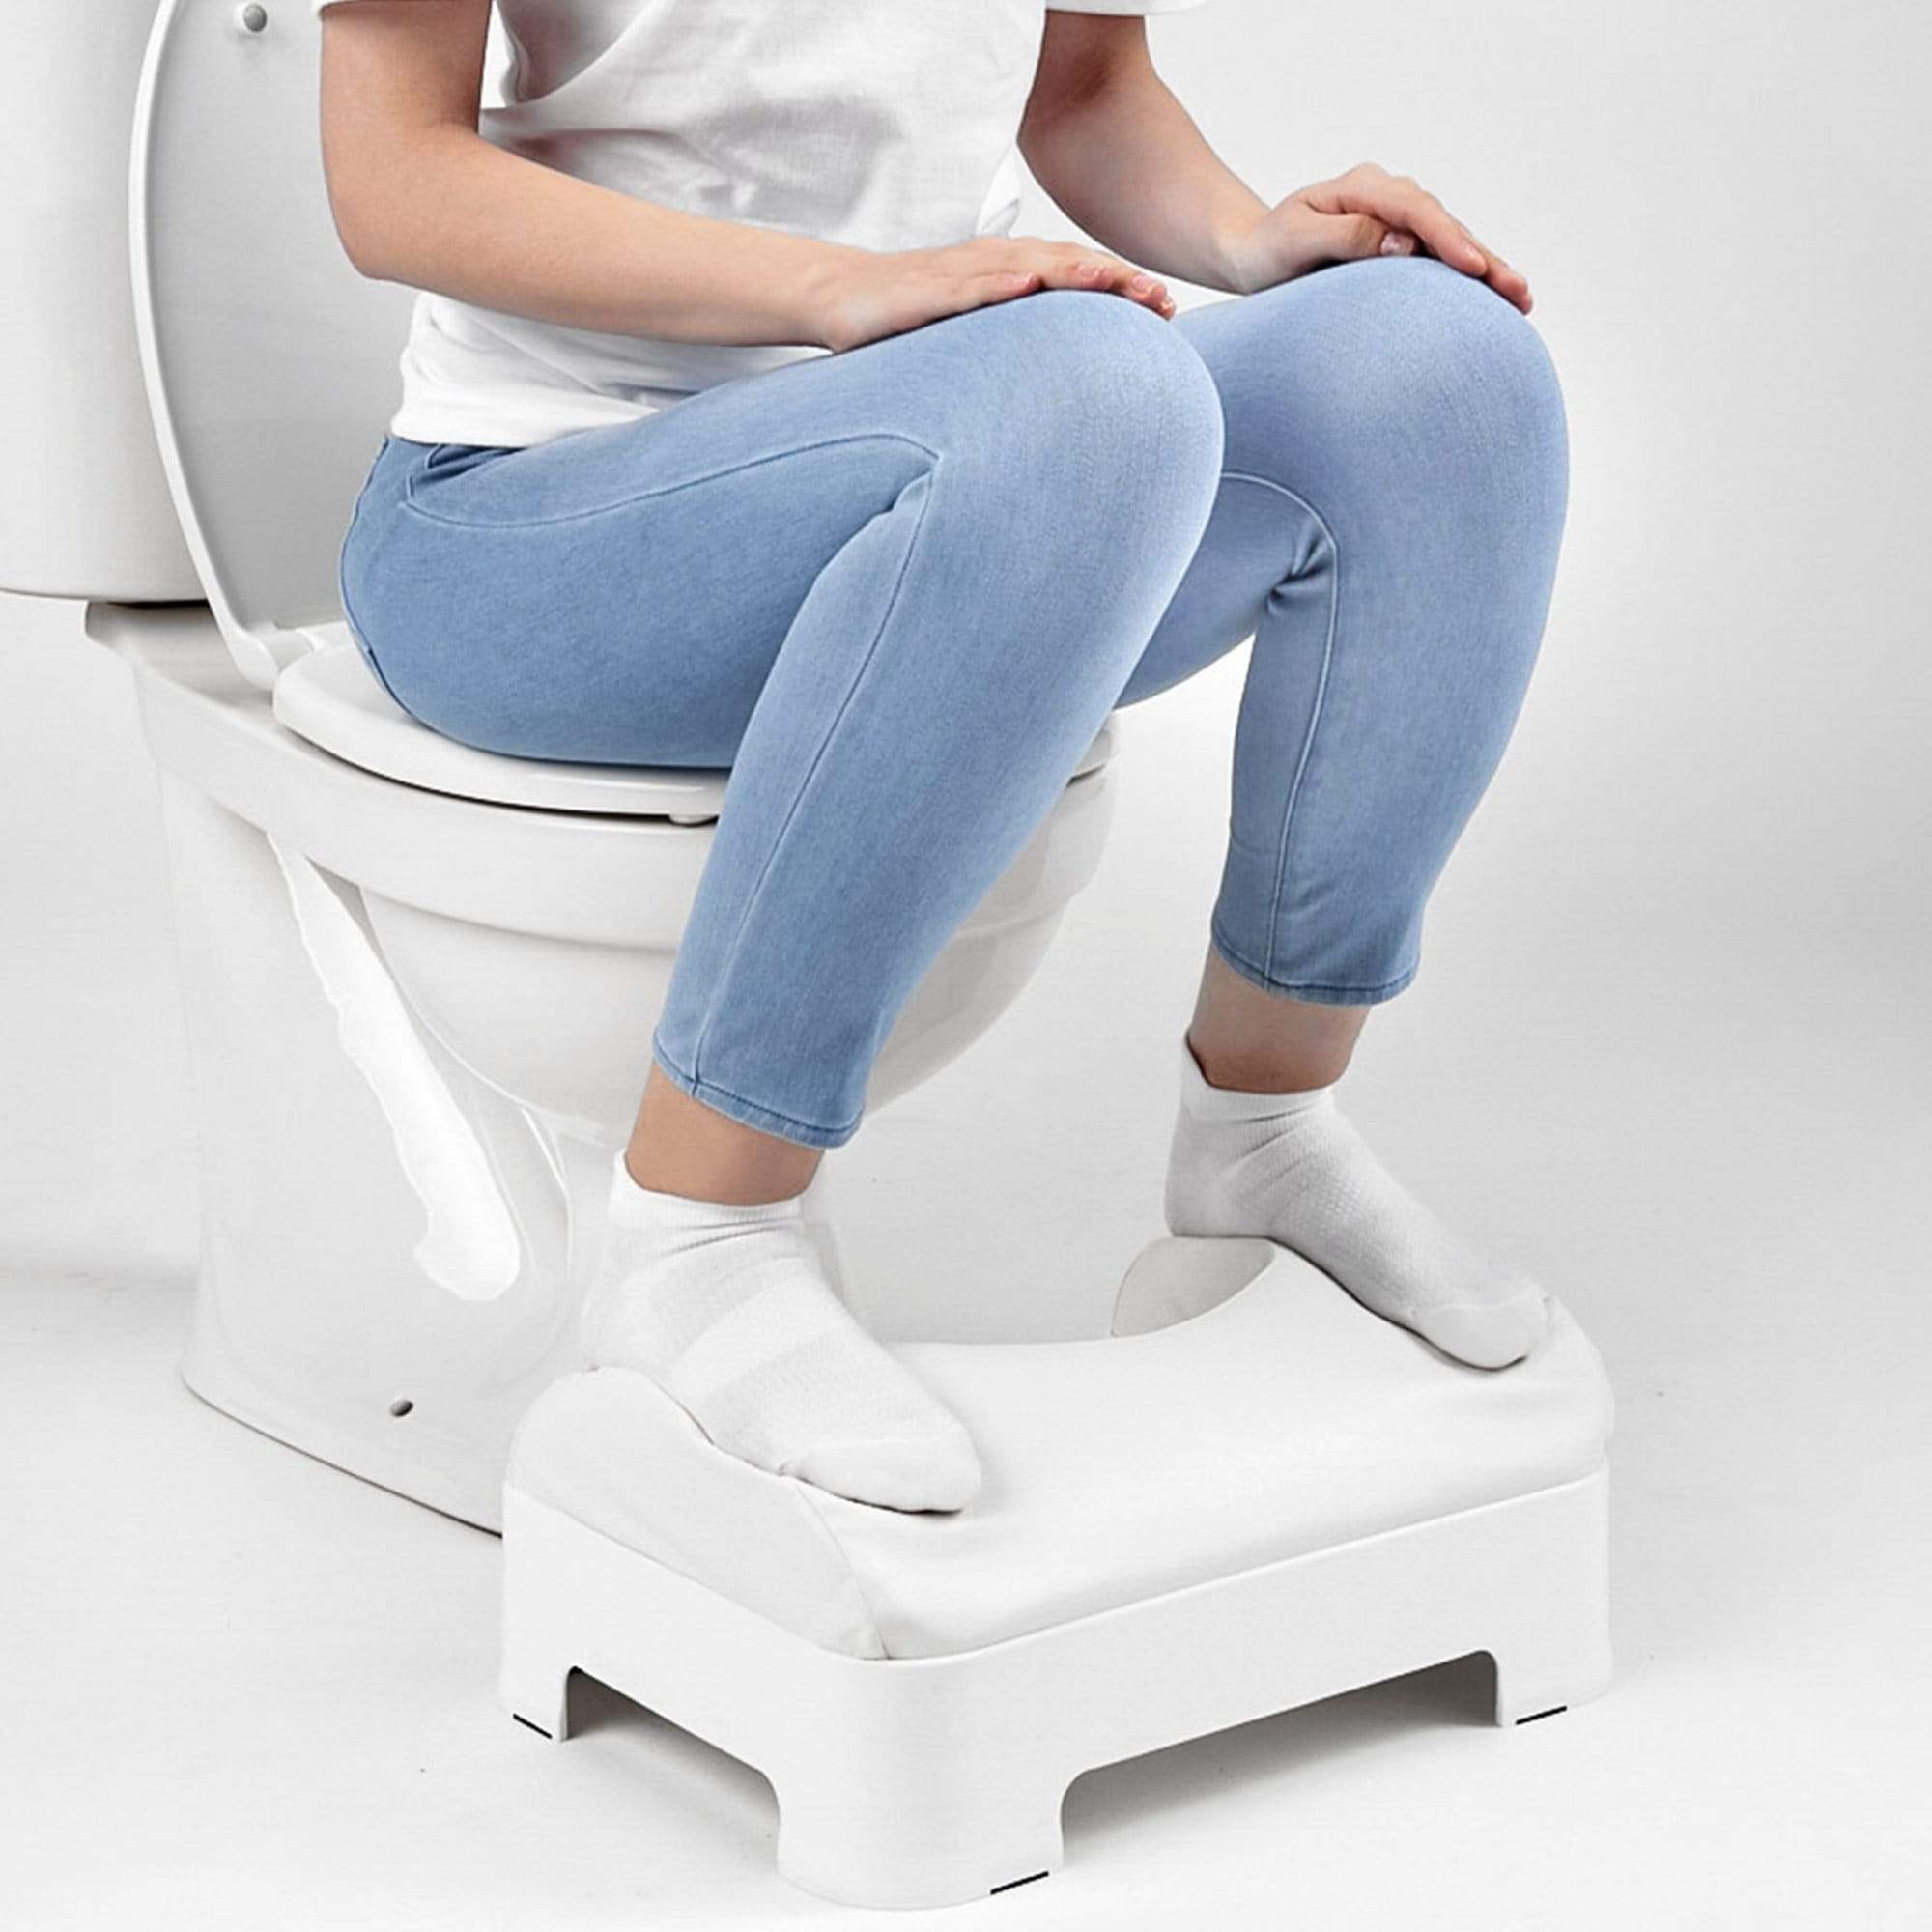 Model in a white shirt and jeans is sitting on the toilet while planting feet on the LUXE footstool